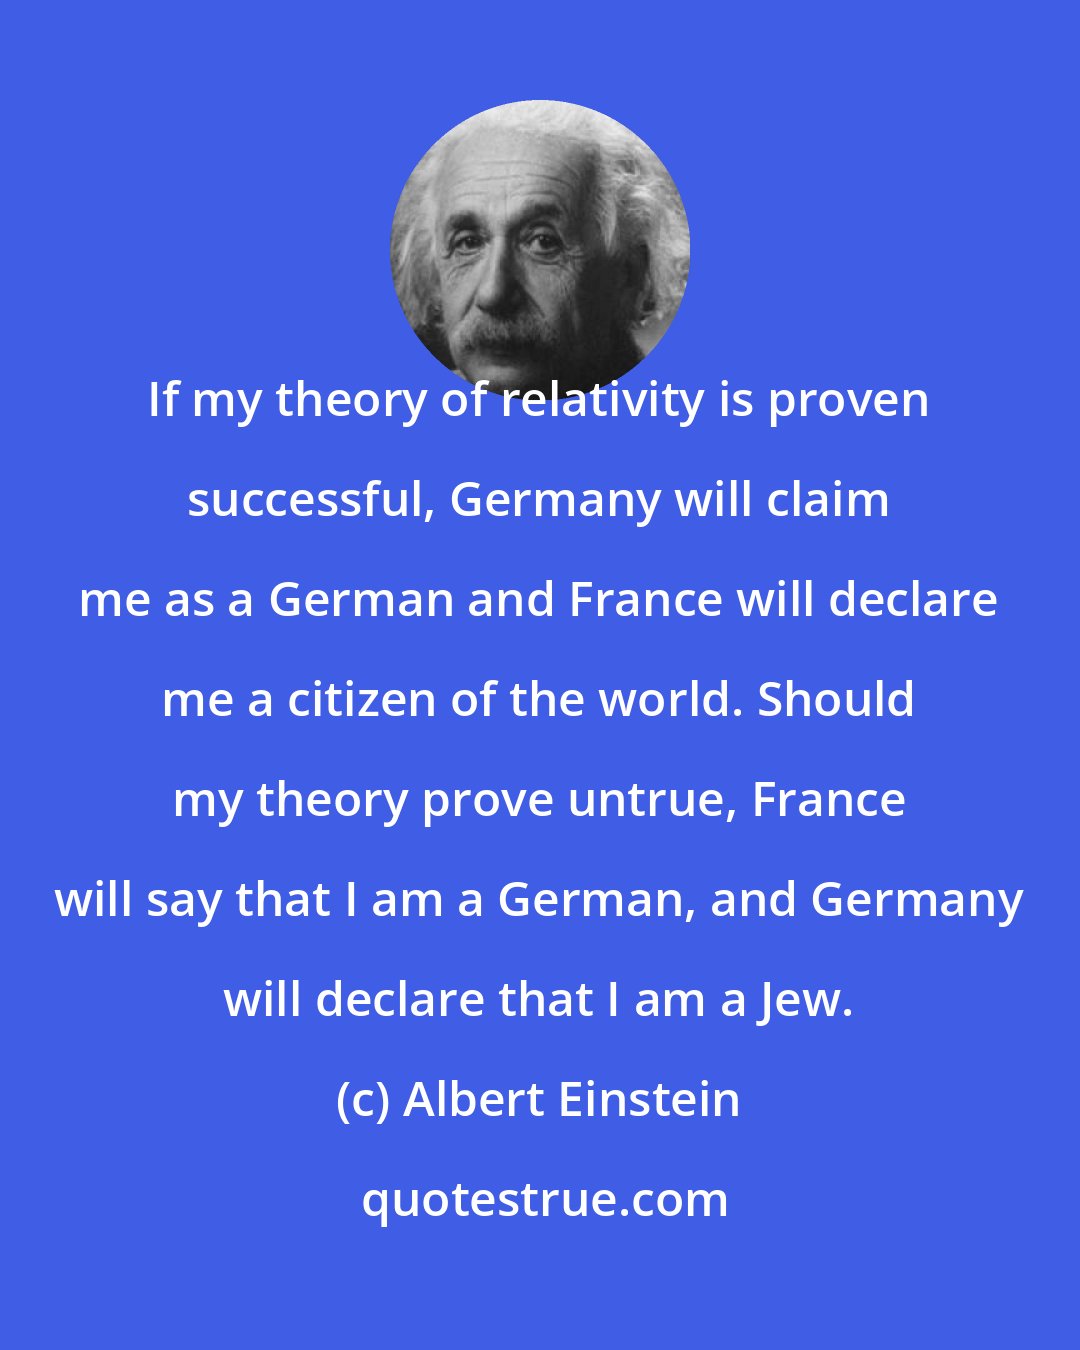 Albert Einstein: If my theory of relativity is proven successful, Germany will claim me as a German and France will declare me a citizen of the world. Should my theory prove untrue, France will say that I am a German, and Germany will declare that I am a Jew.